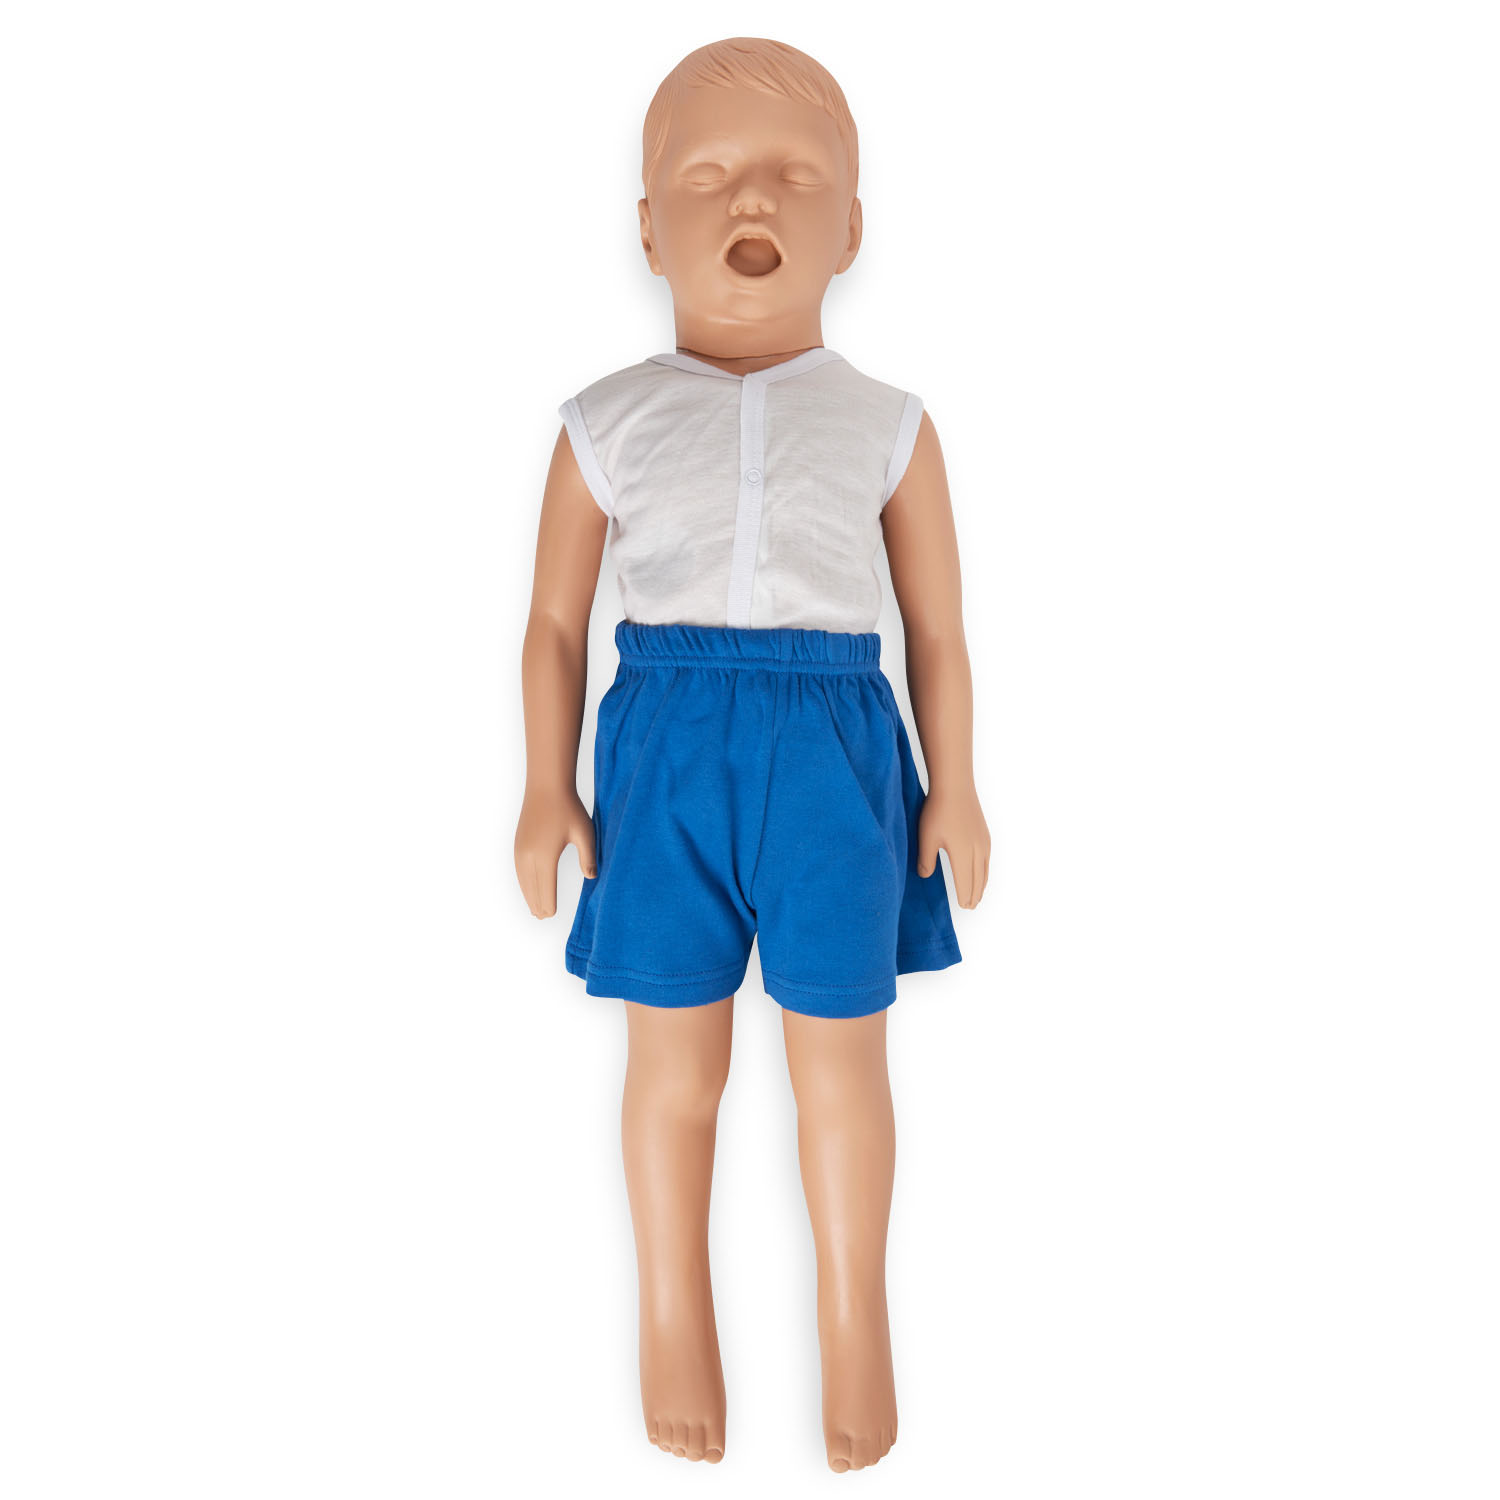 Rescue Timmy 3 Year Old Manikin, Light (No CPR)